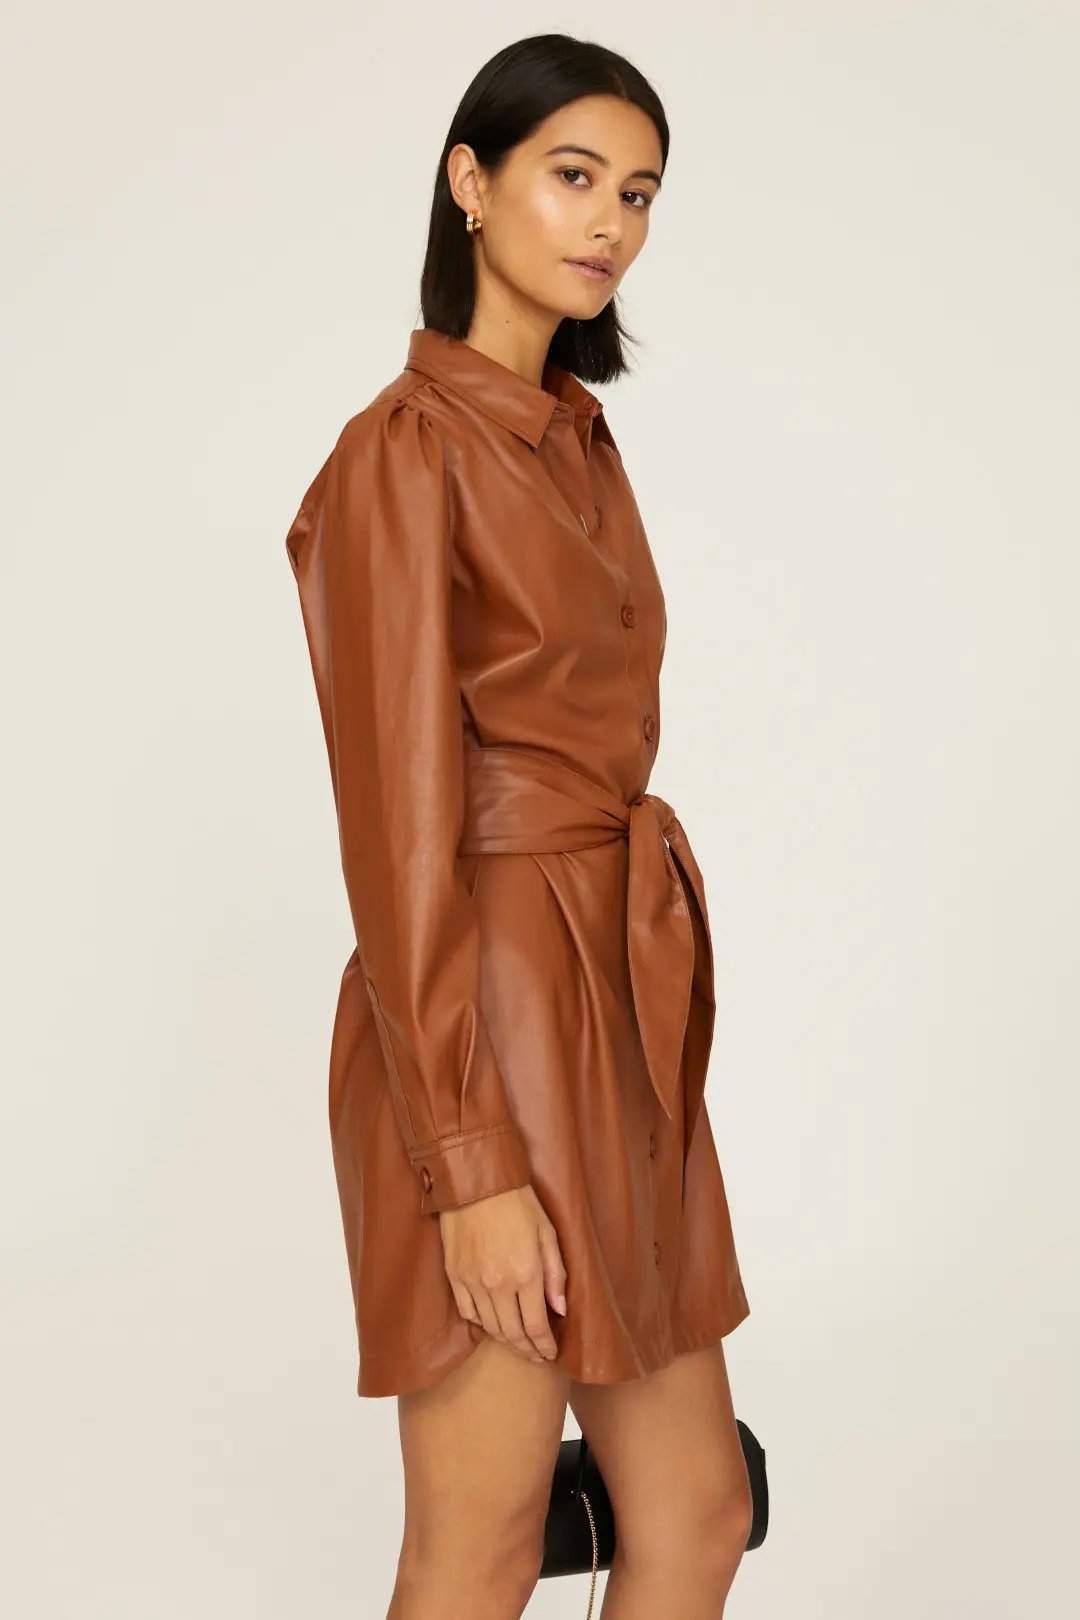 peter som fall fashion Brown Faux Leather Shirtdress (Copy)